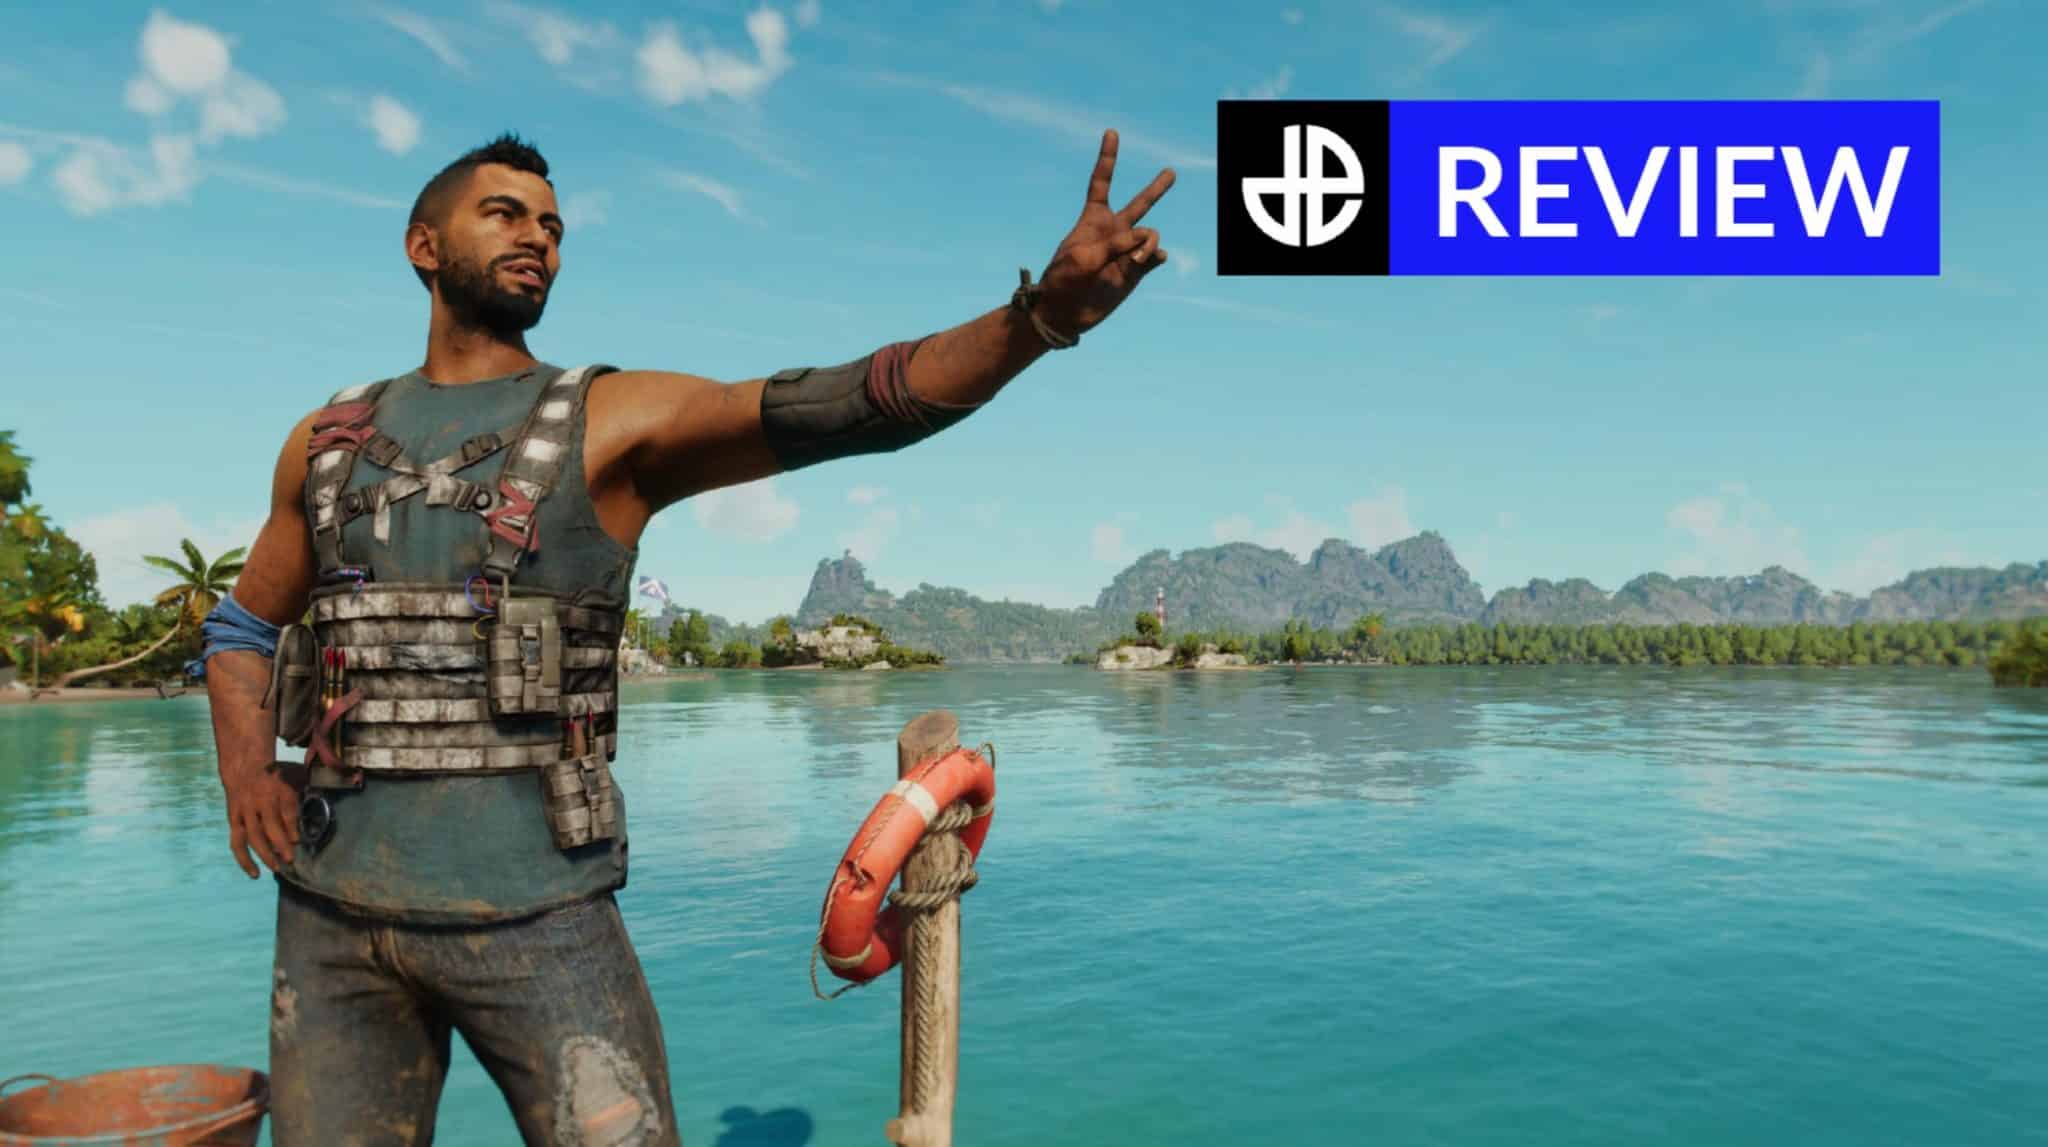 https://editors.dexerto.com/wp-content/uploads/2021/10/06/Far-Cry-6-review-thumbnail-scaled.jpg